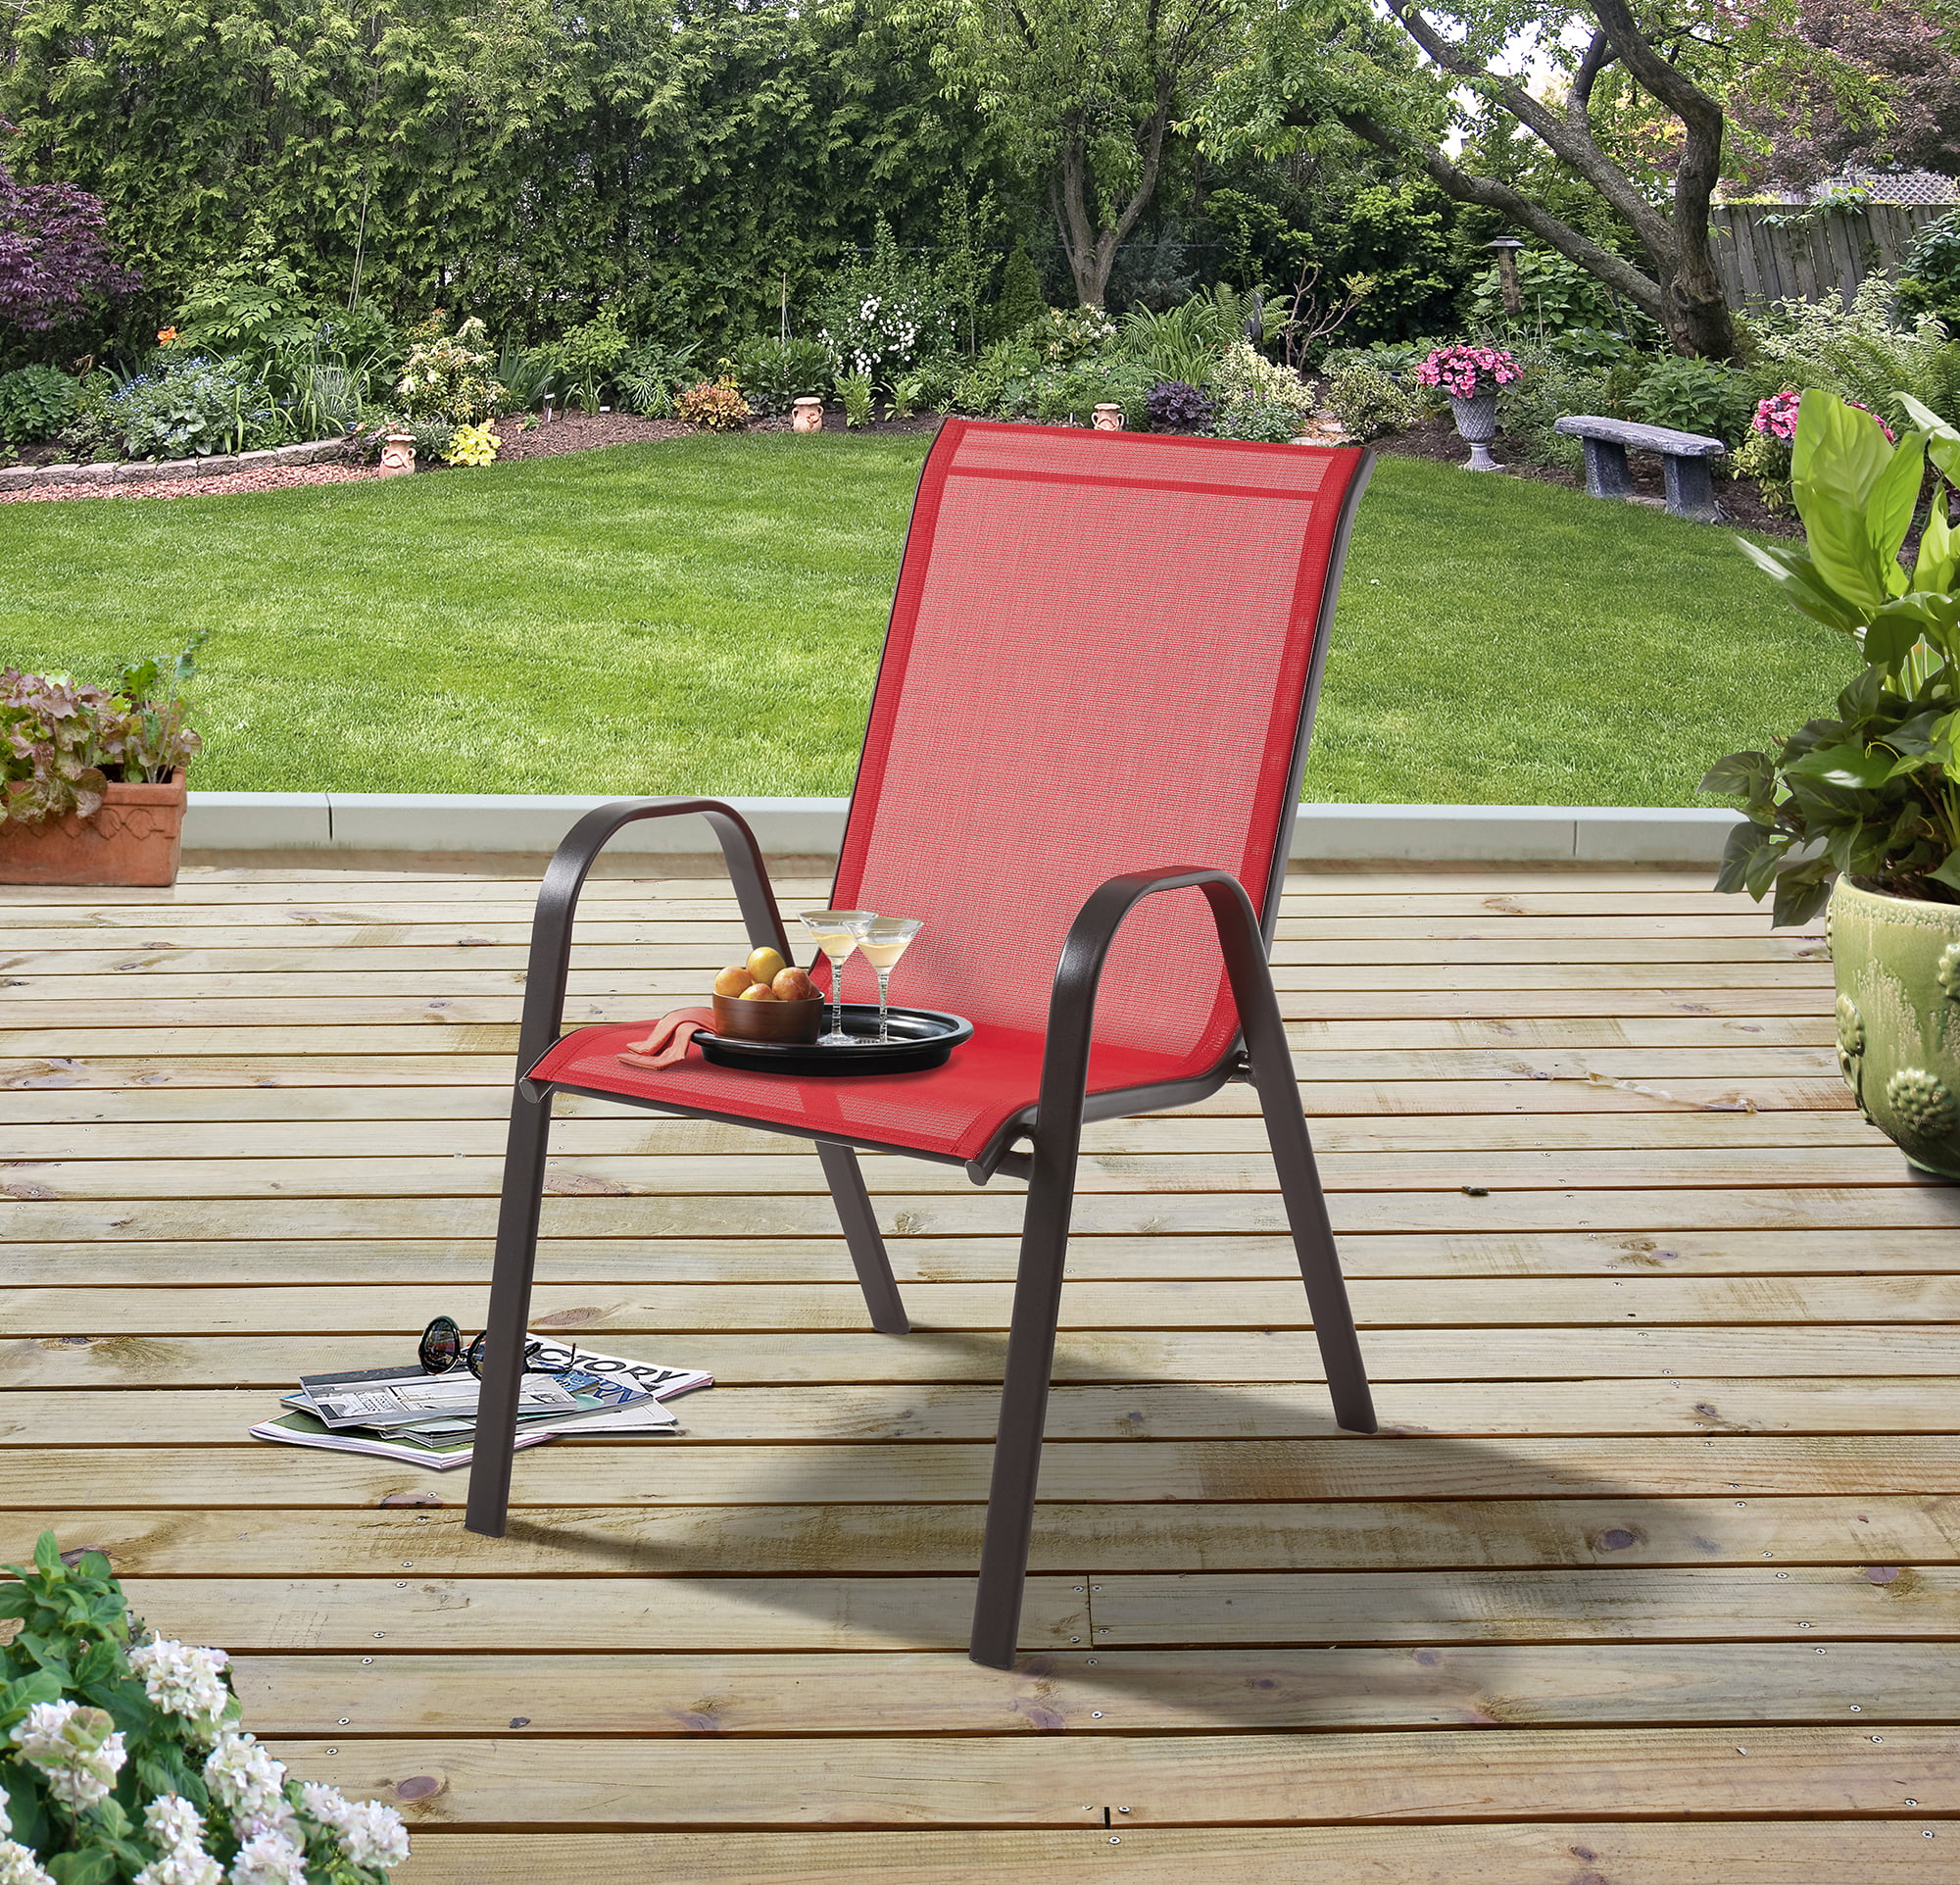 Sling Outdoor Patio Chair Red, How Do You Clean Outdoor Mesh Chairs